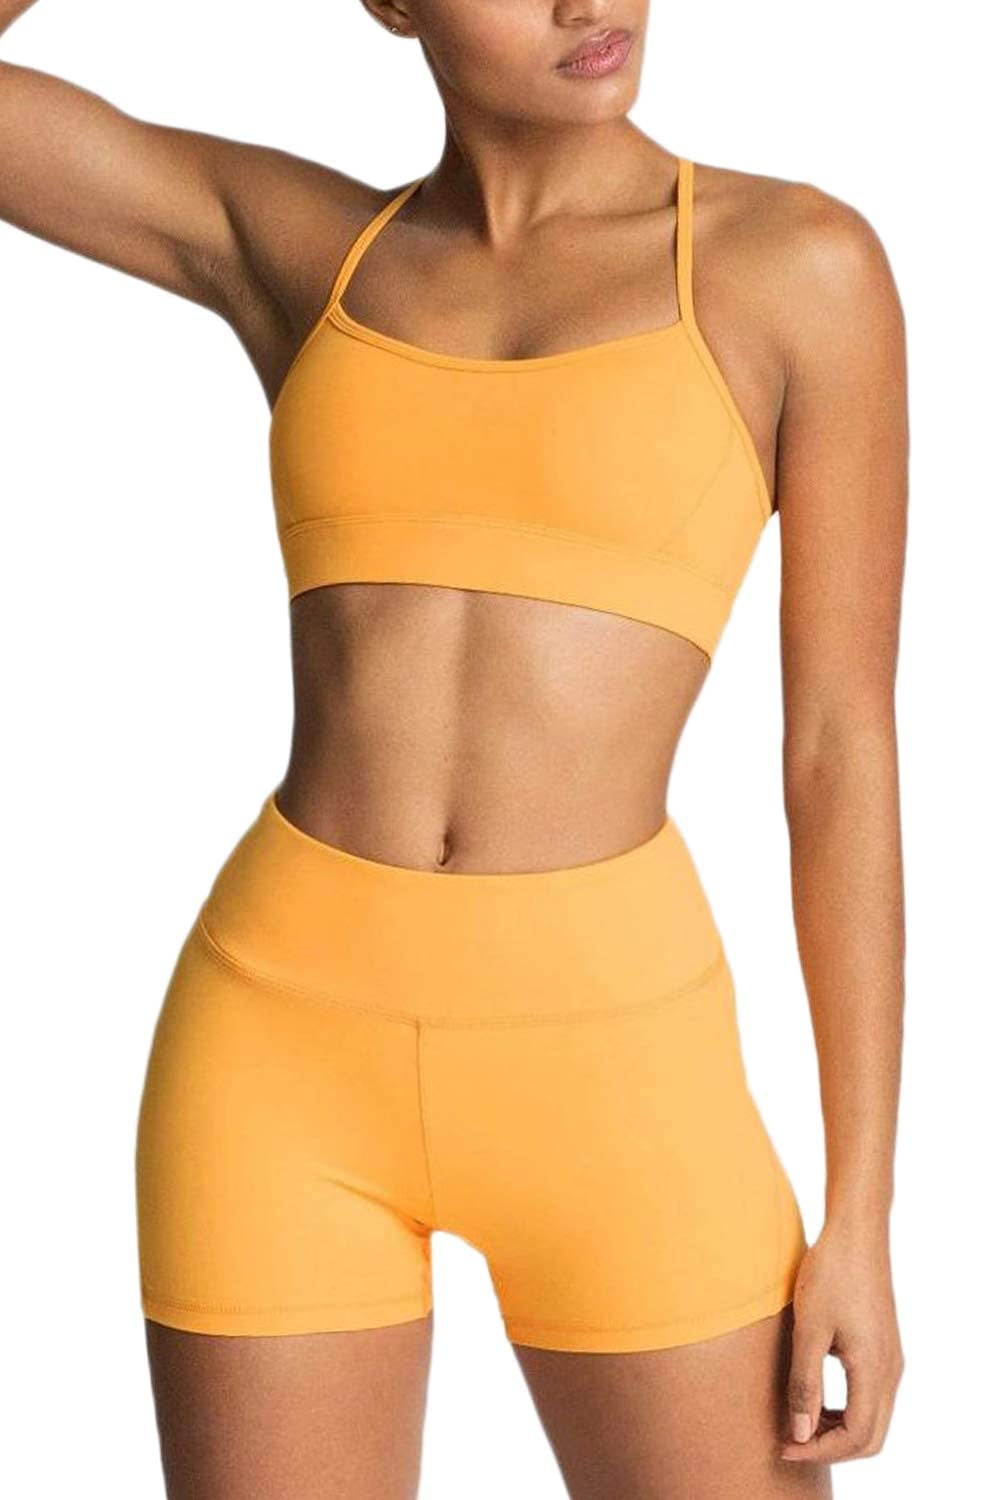 IBTOM CASTLE Women Workout Sets Yoga Outfits, Sports Bra and High Waist  Leggings Gym Clothes Tracksuit, 2-Piece XS Yellow 